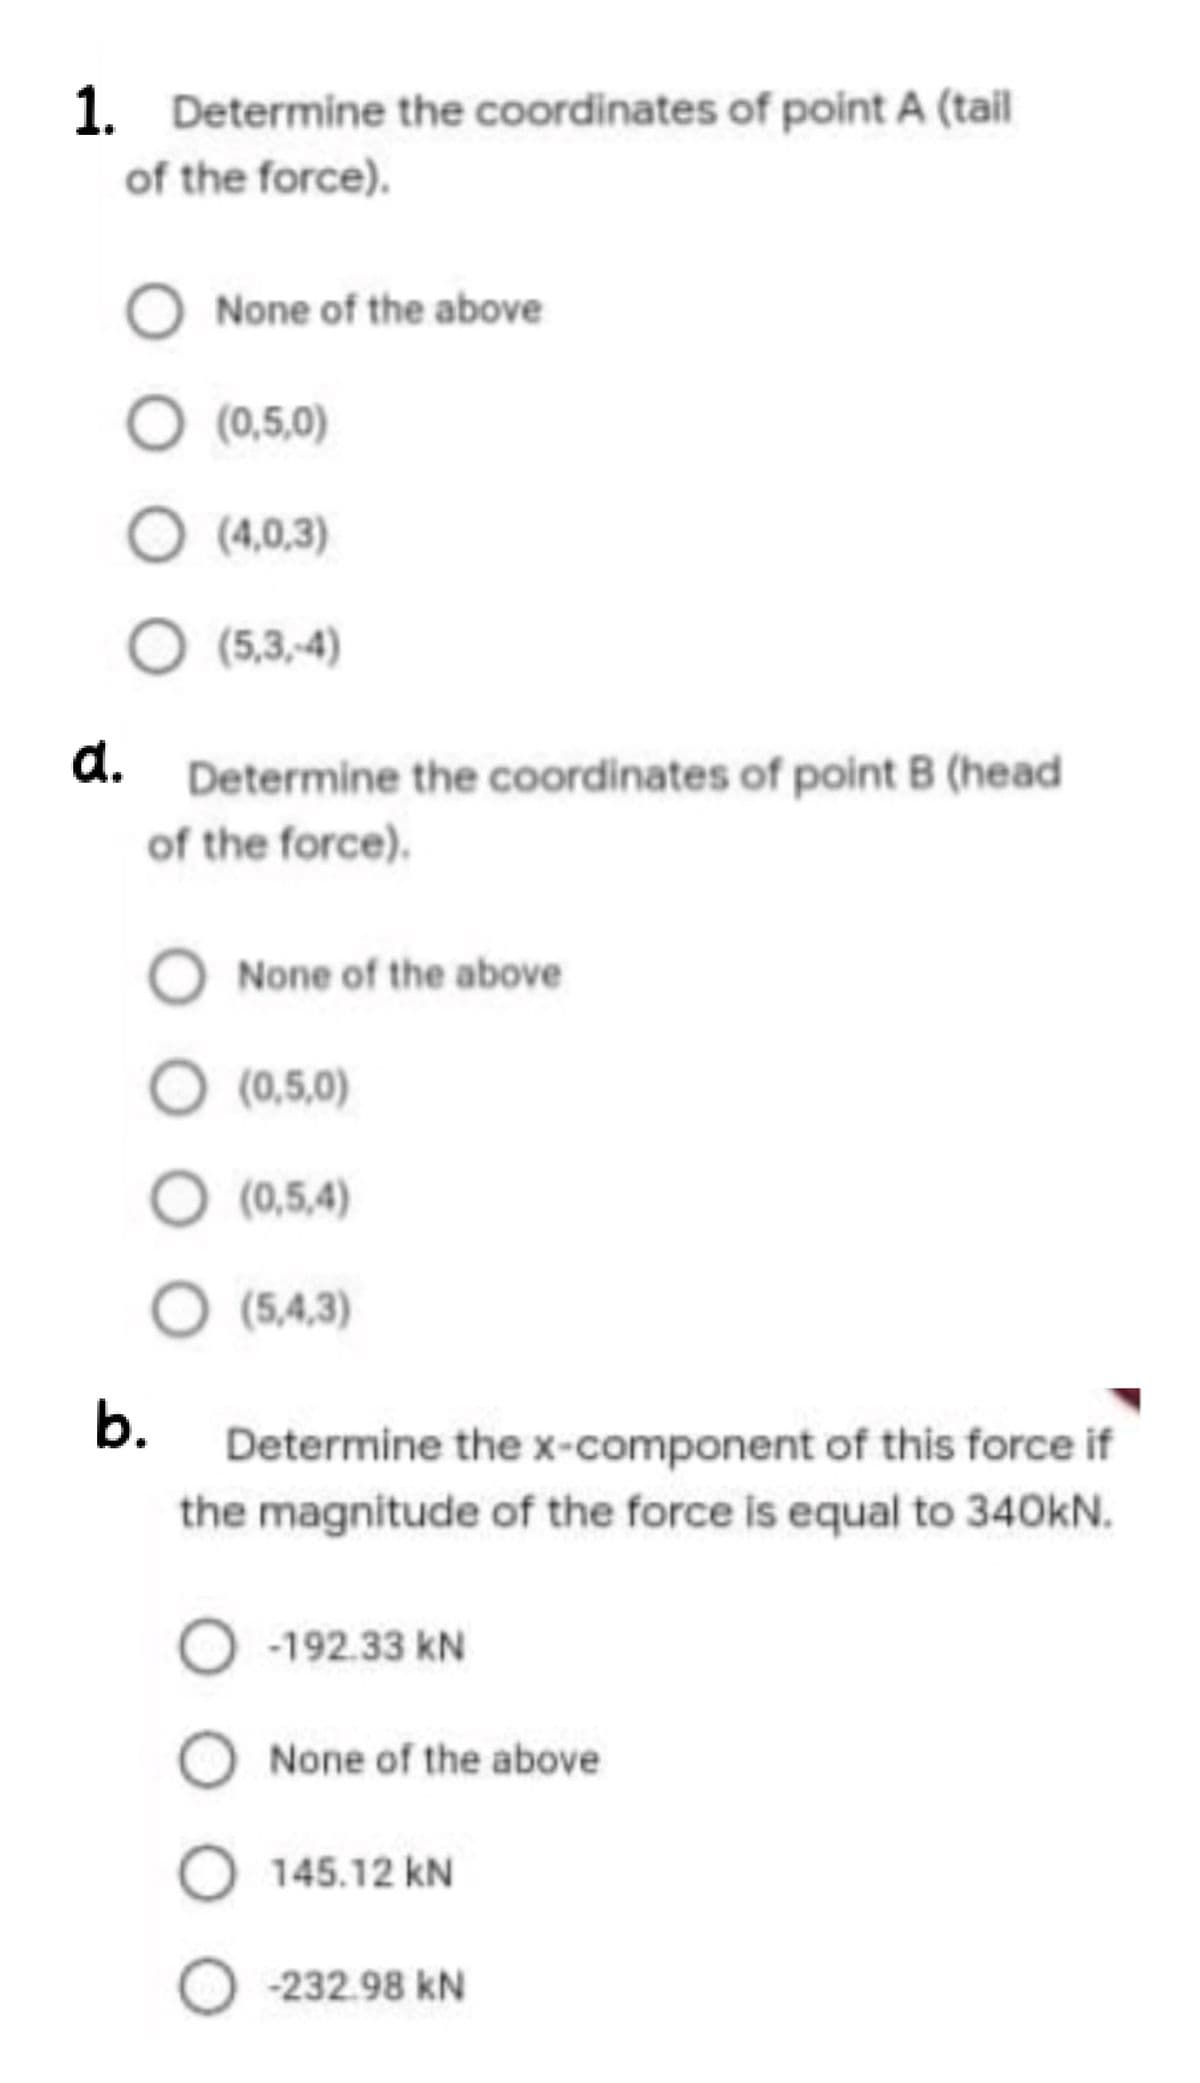 1. Determine the coordinates of point A (tail
of the force).
None of the above
O (0,5,0)
O (4,0,3)
(5,3,-4)
d. Determine the coordinates of point B (head
of the force).
O None of the above
(0,5,0)
O (0,5,4)
O (5,4,3)
b.
Determine the x-component of this force if
the magnitude of the force is equal to 340kN.
-192.33 kN
None of the above
145.12 kN
-232.98 kN
O O o O
O O O O
